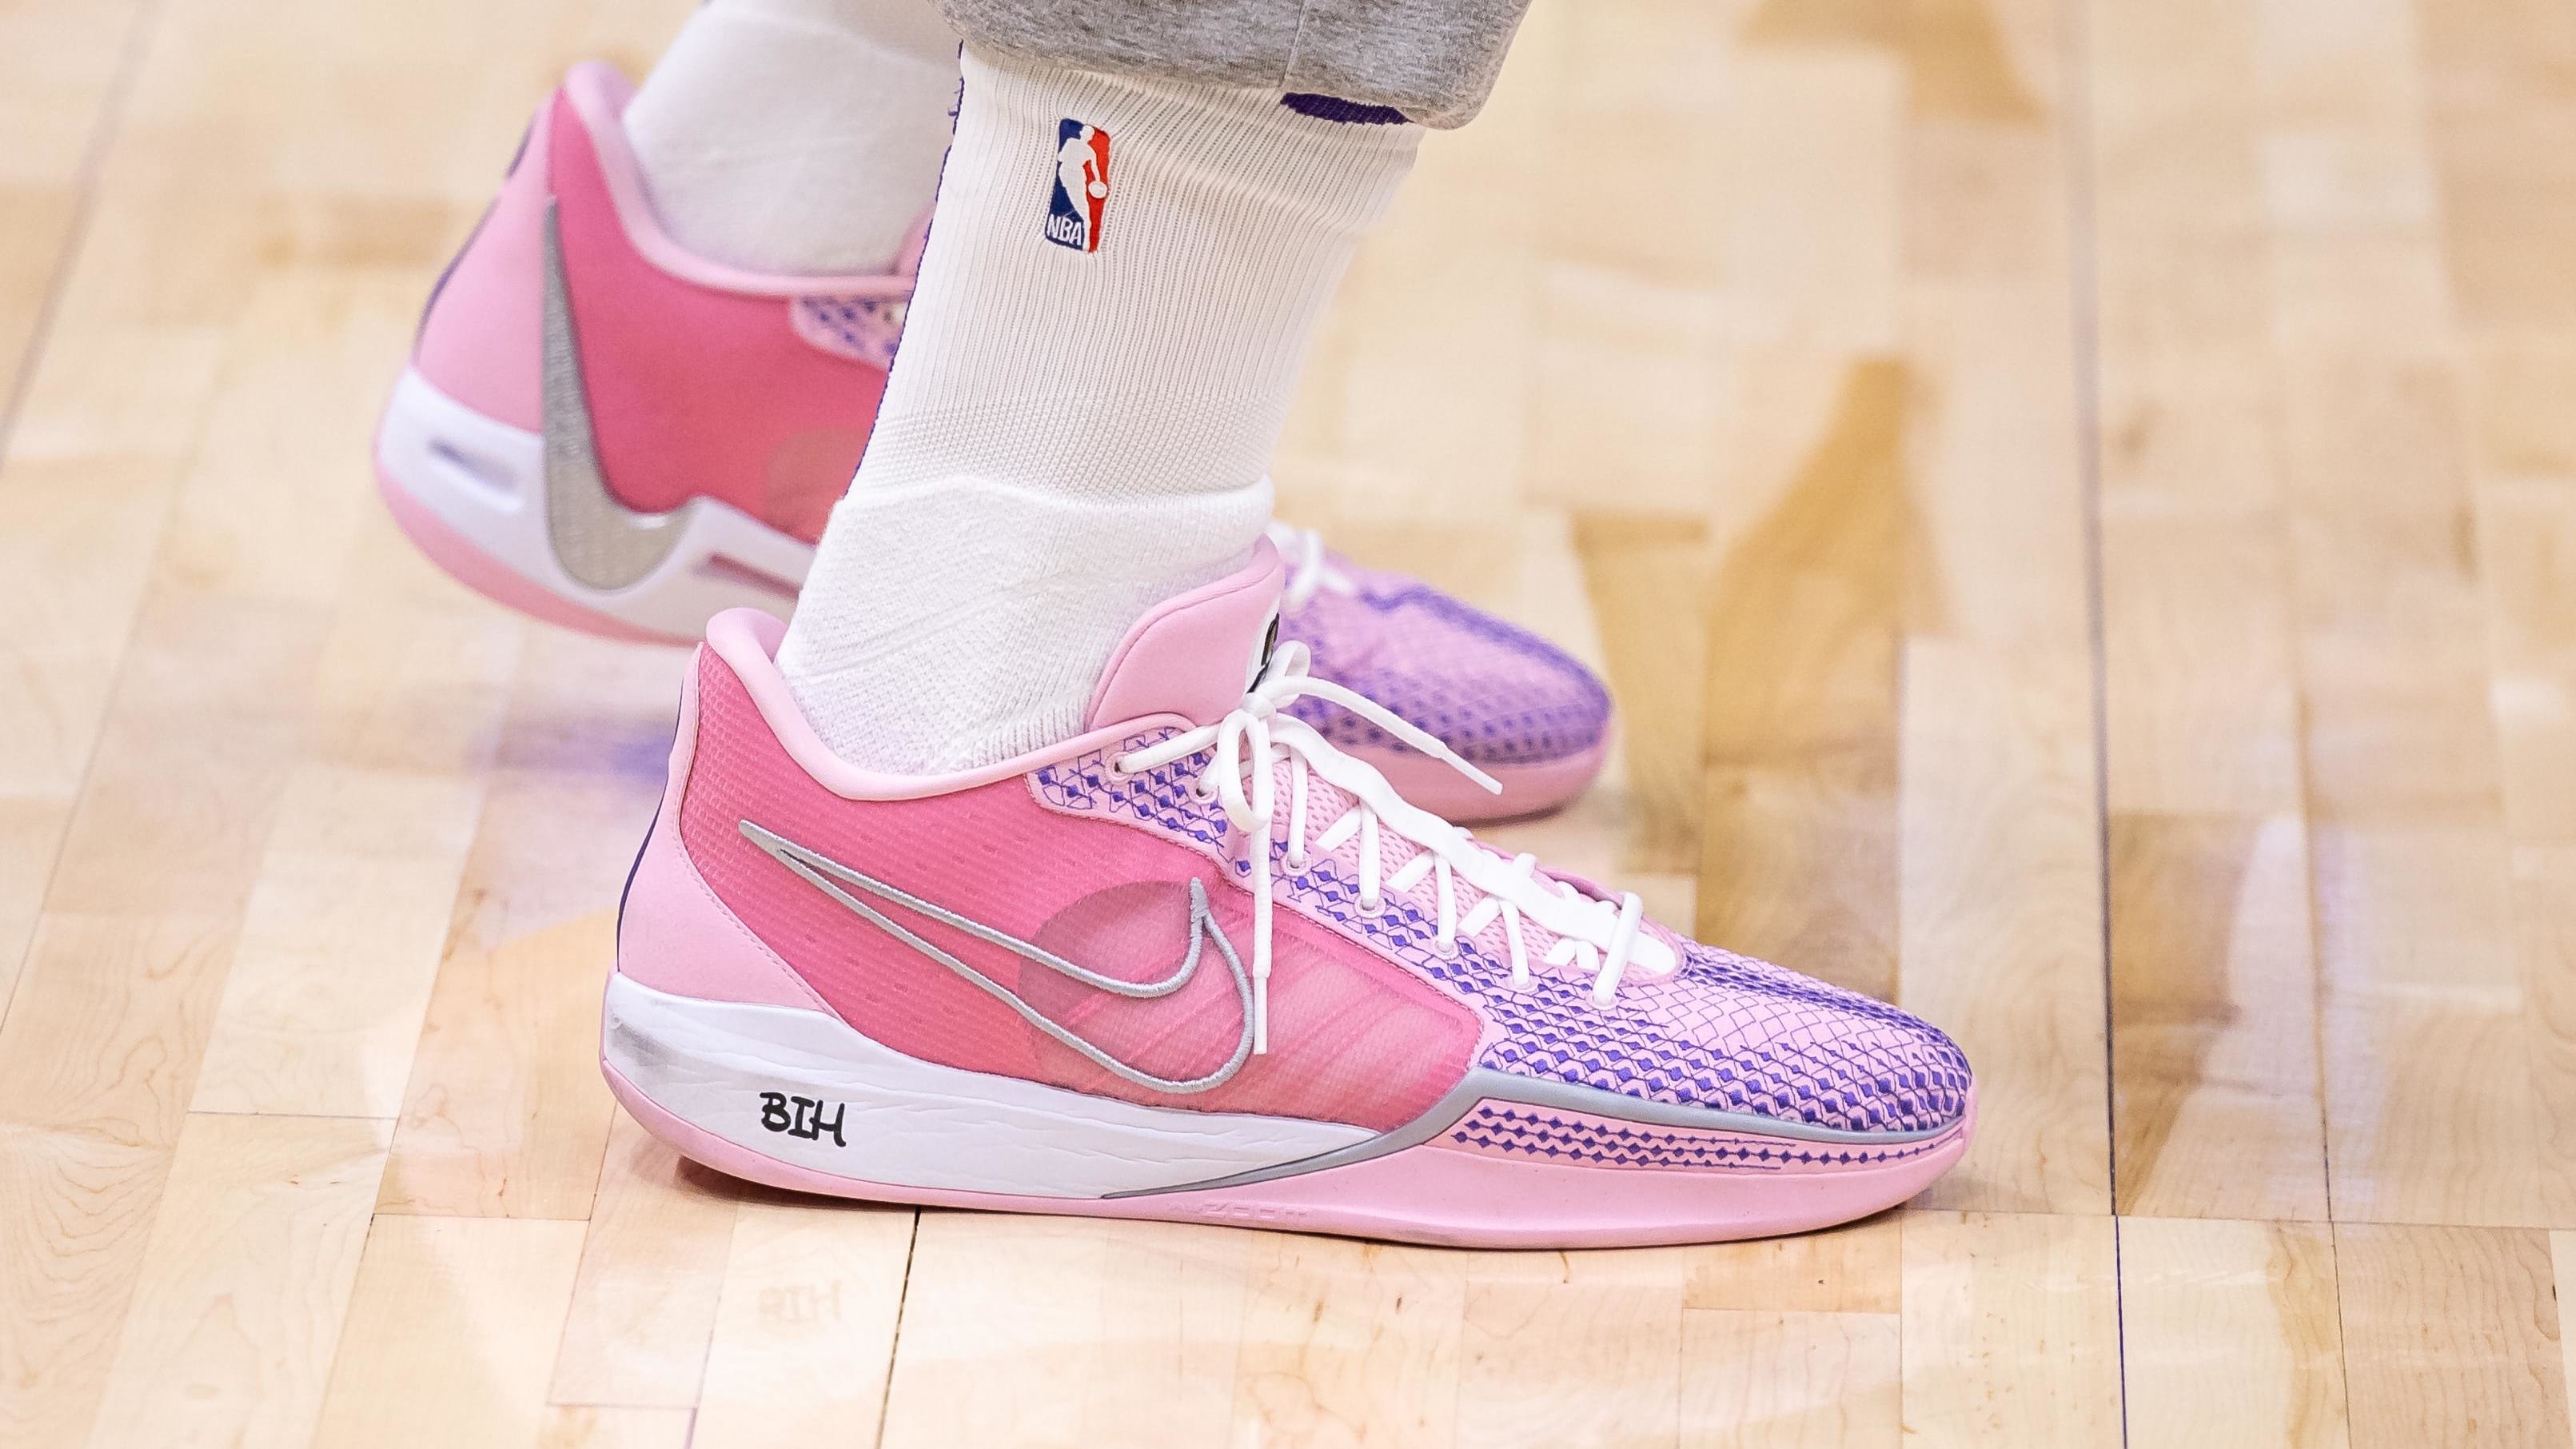 Sabrina Ionescu's pink and white Nike sneakers.